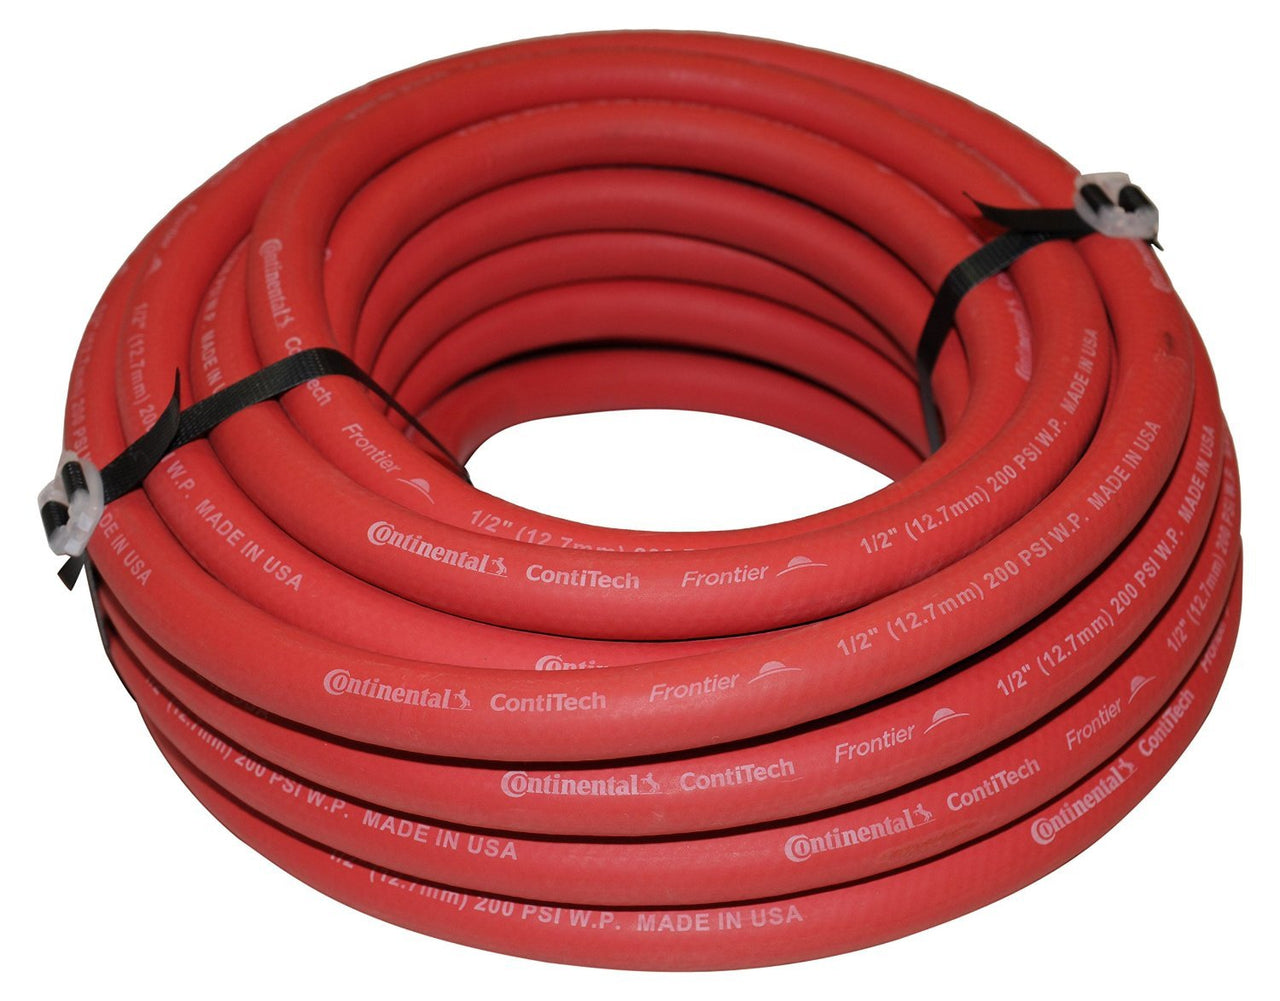 Continental CONTITECH (Formerly Goodyear) 30819 1/2-Inch x 50-Feet Rubber Air Hose 1/2-Inch Fittings, Red - Made in USA